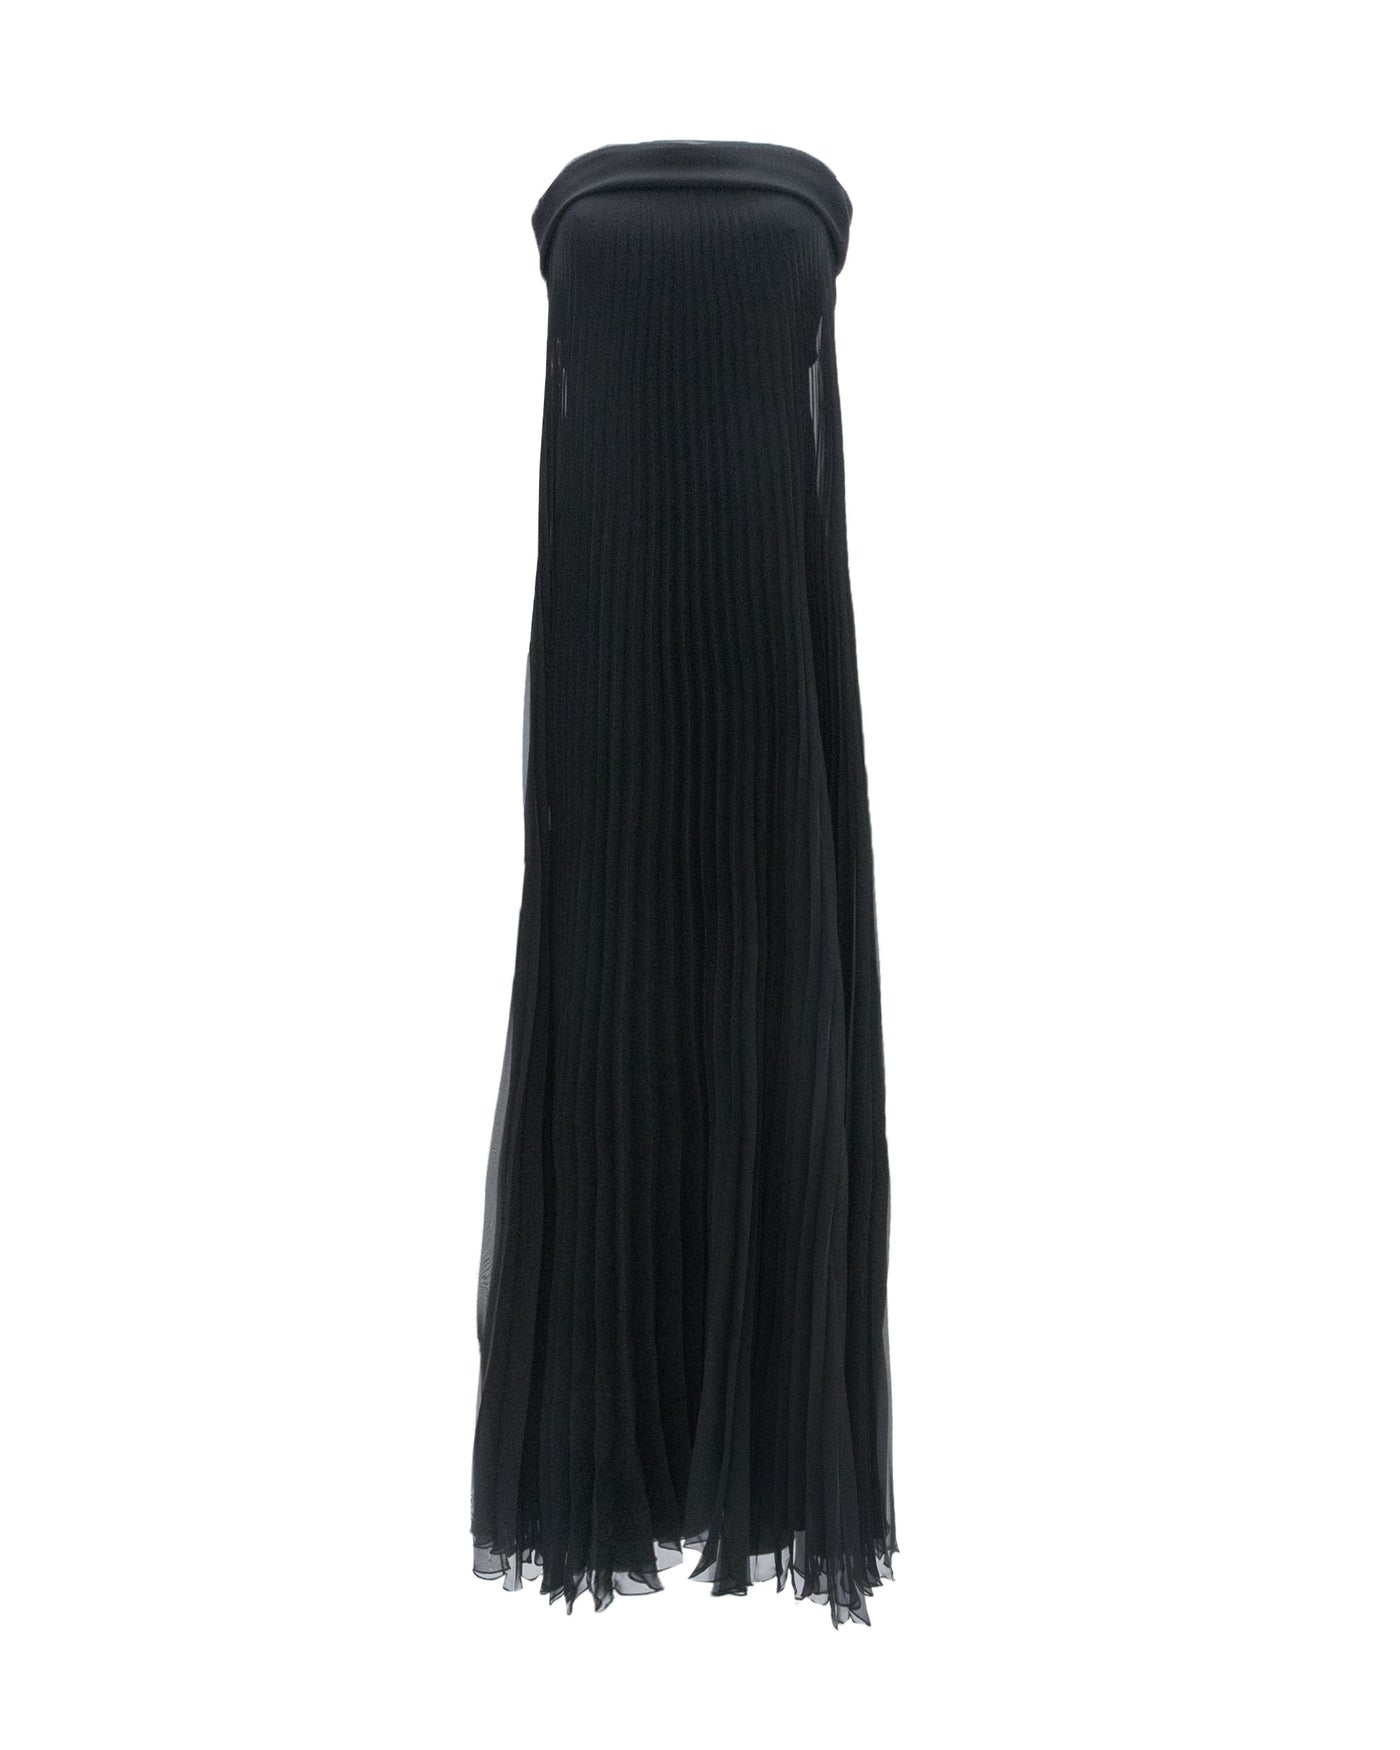 Pleated Strapless Dress